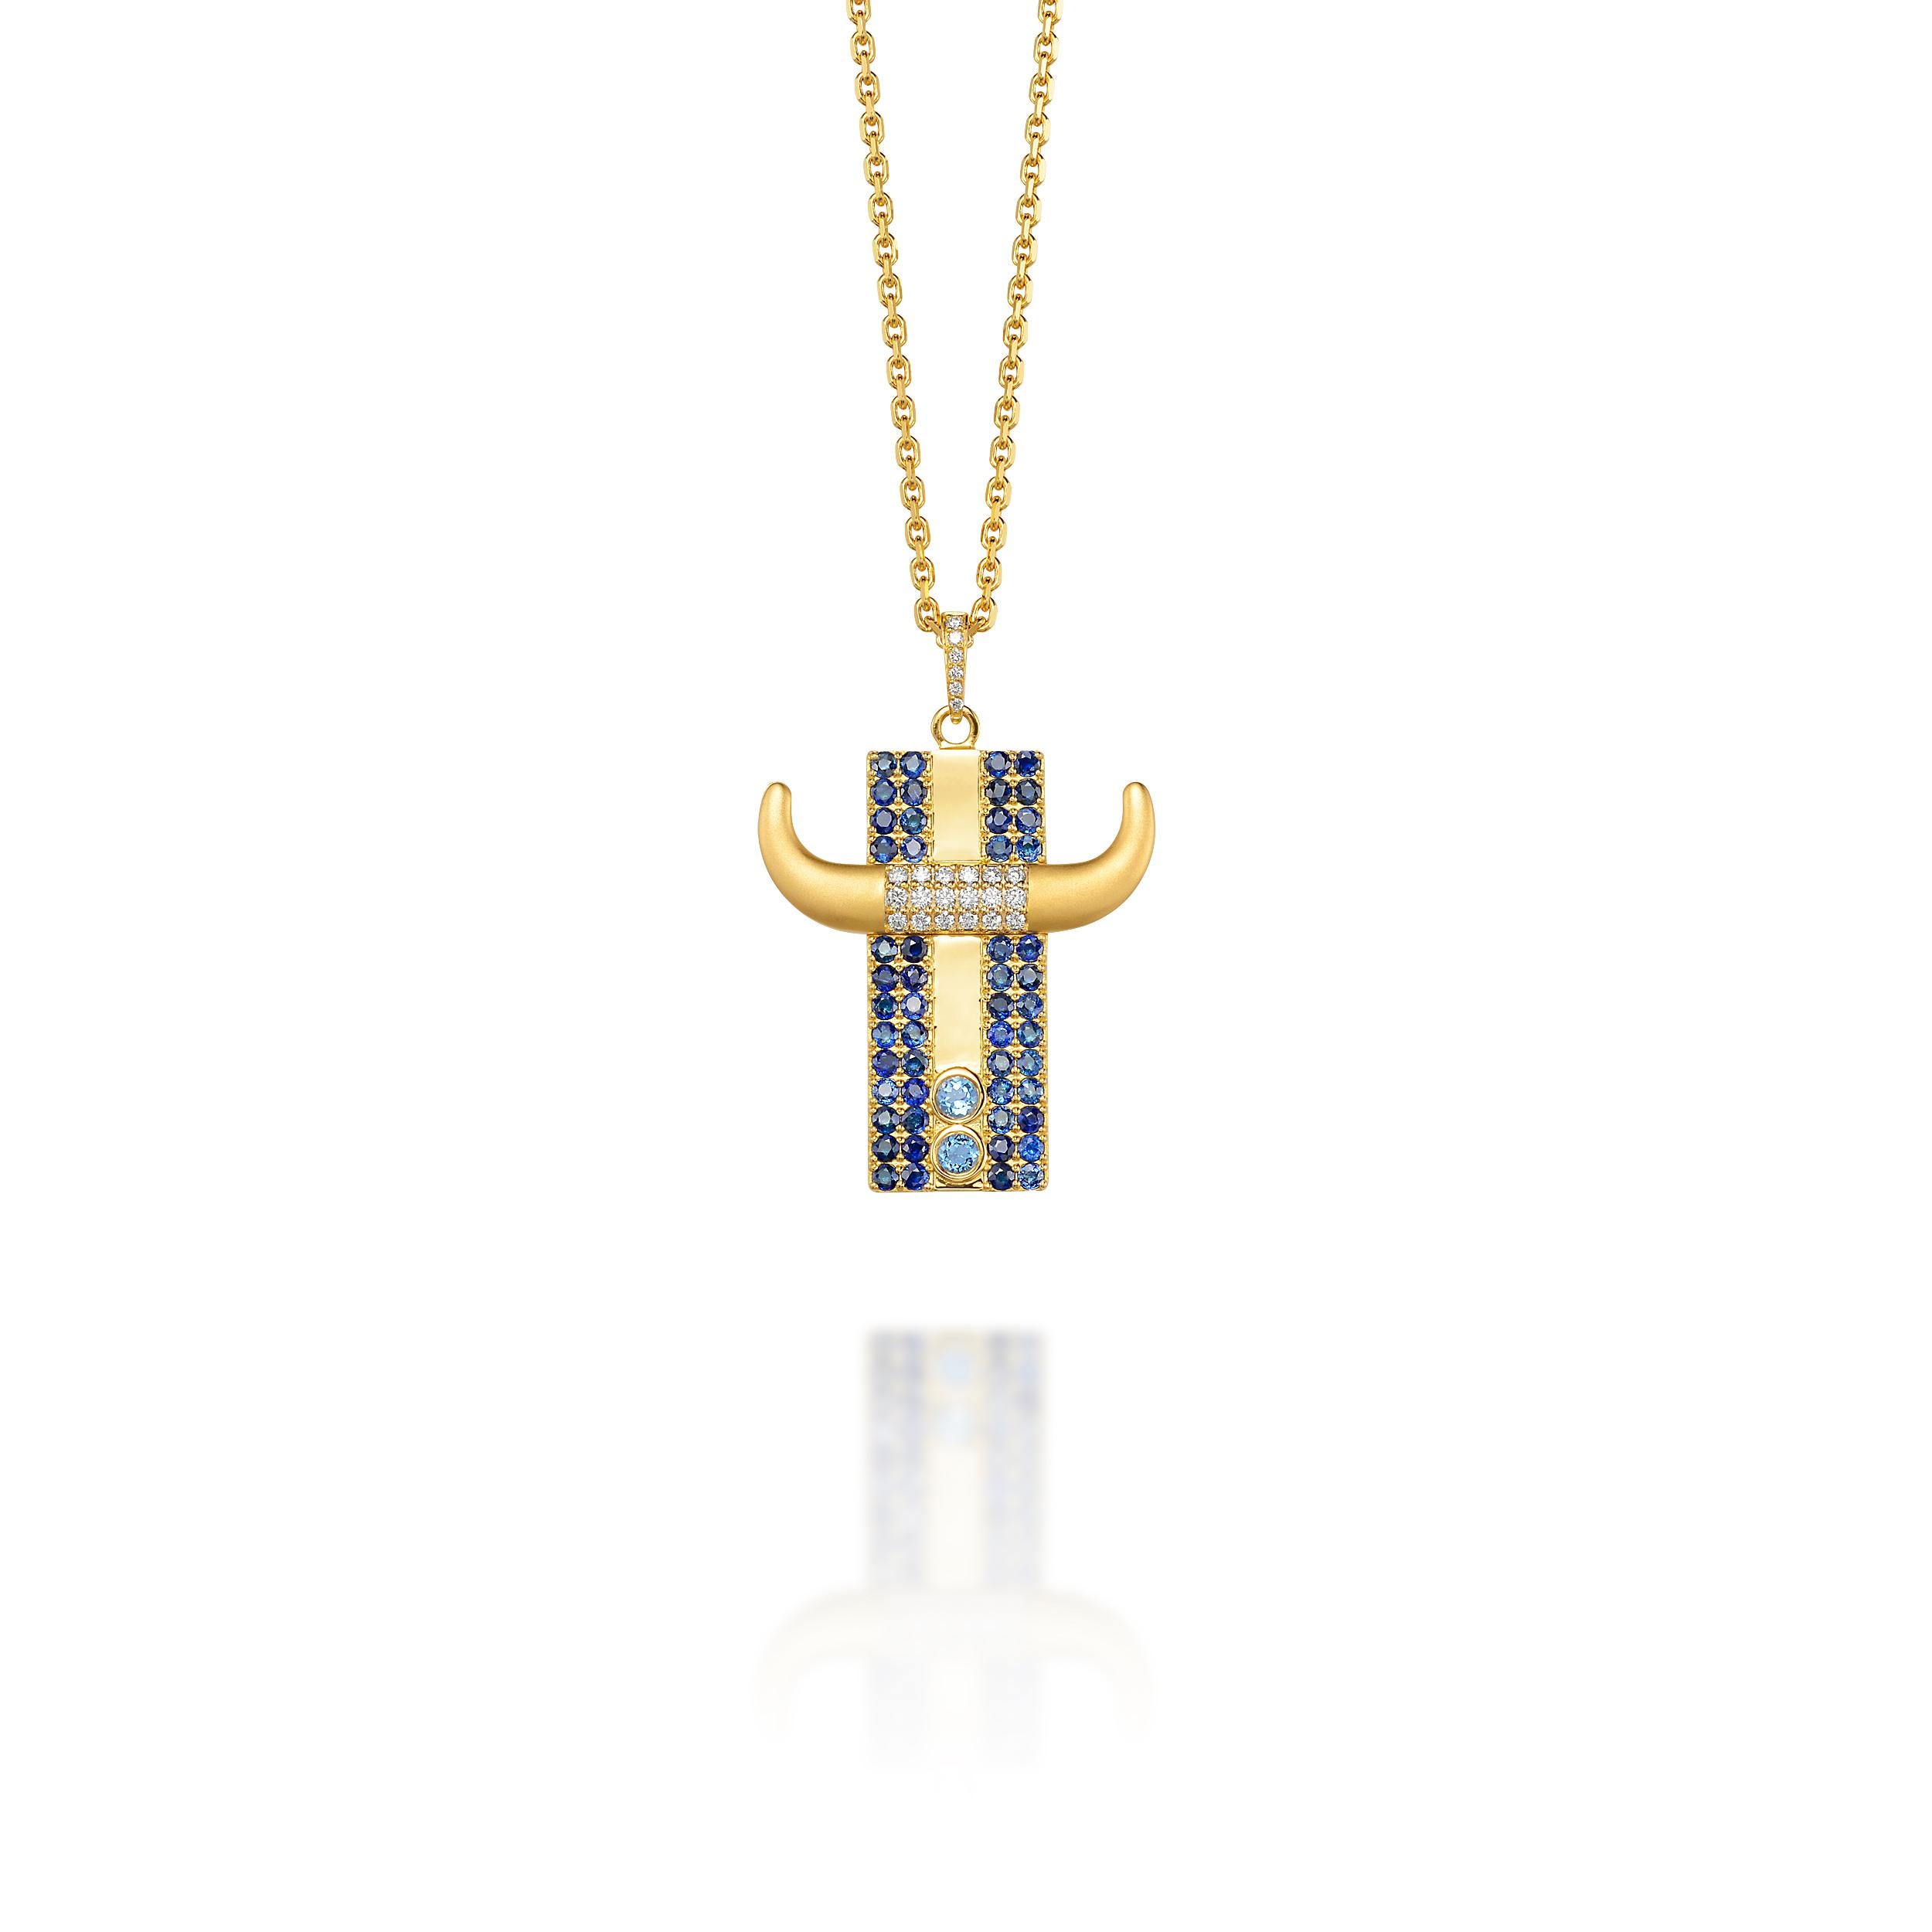 Taurus Pendant - admirably sensual, loyal and tenacious. Delighted by all beauty in a deeper sense. Aquamarines bring liquidity and relaxation to your mind. Blue Sapphires enliven your soul.

Jazychic Zodiac Pendant 18k Gold with 0.35 ct Diamonds